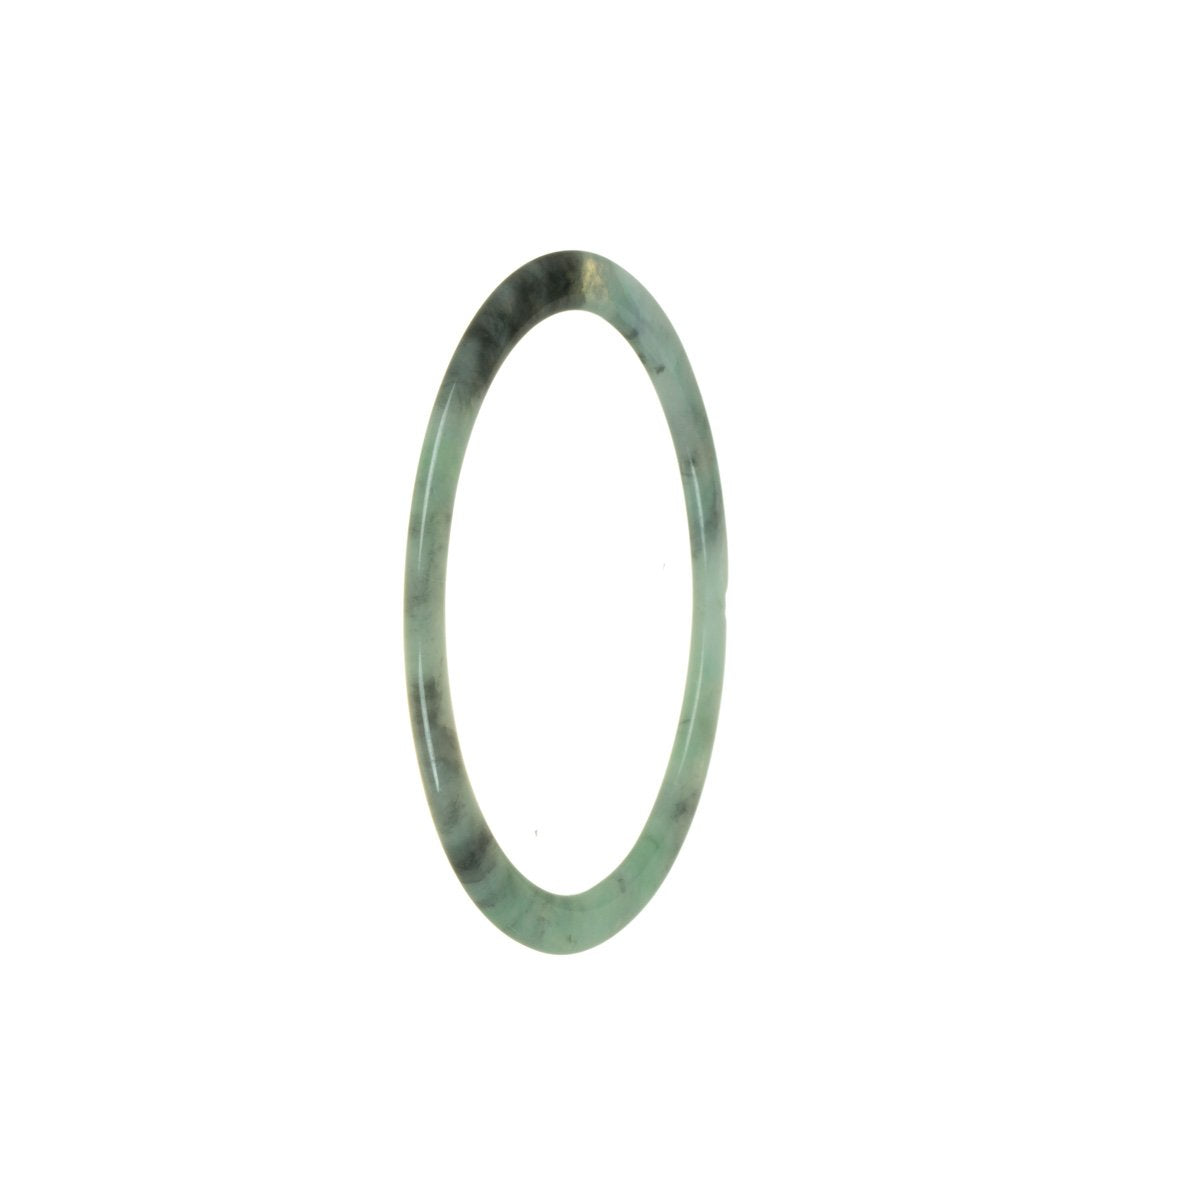 A thin, genuine Type A Green with Grey Jadeite Jade bangle, measuring 55mm.